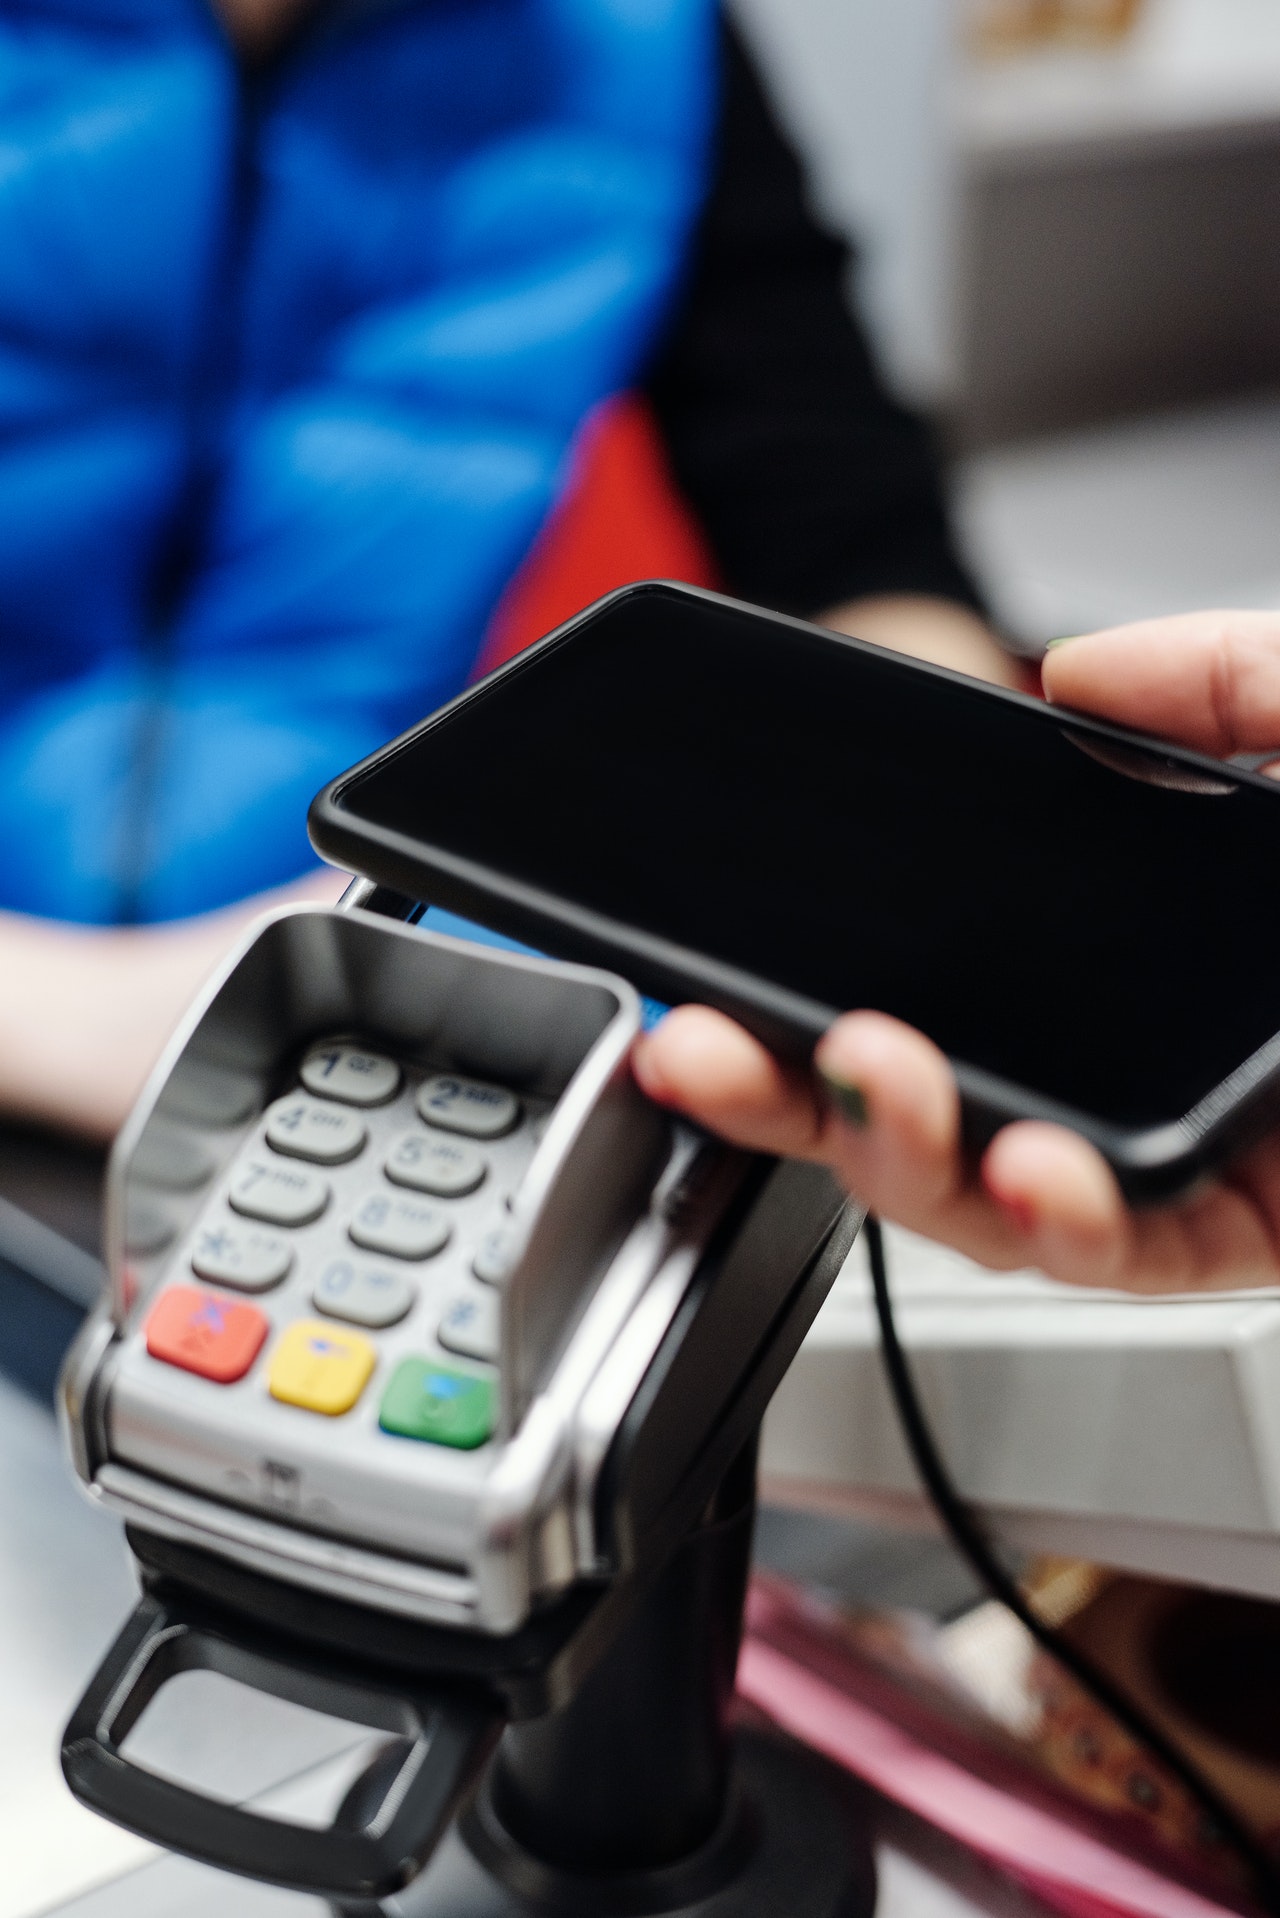 contactless payment using mobile phone